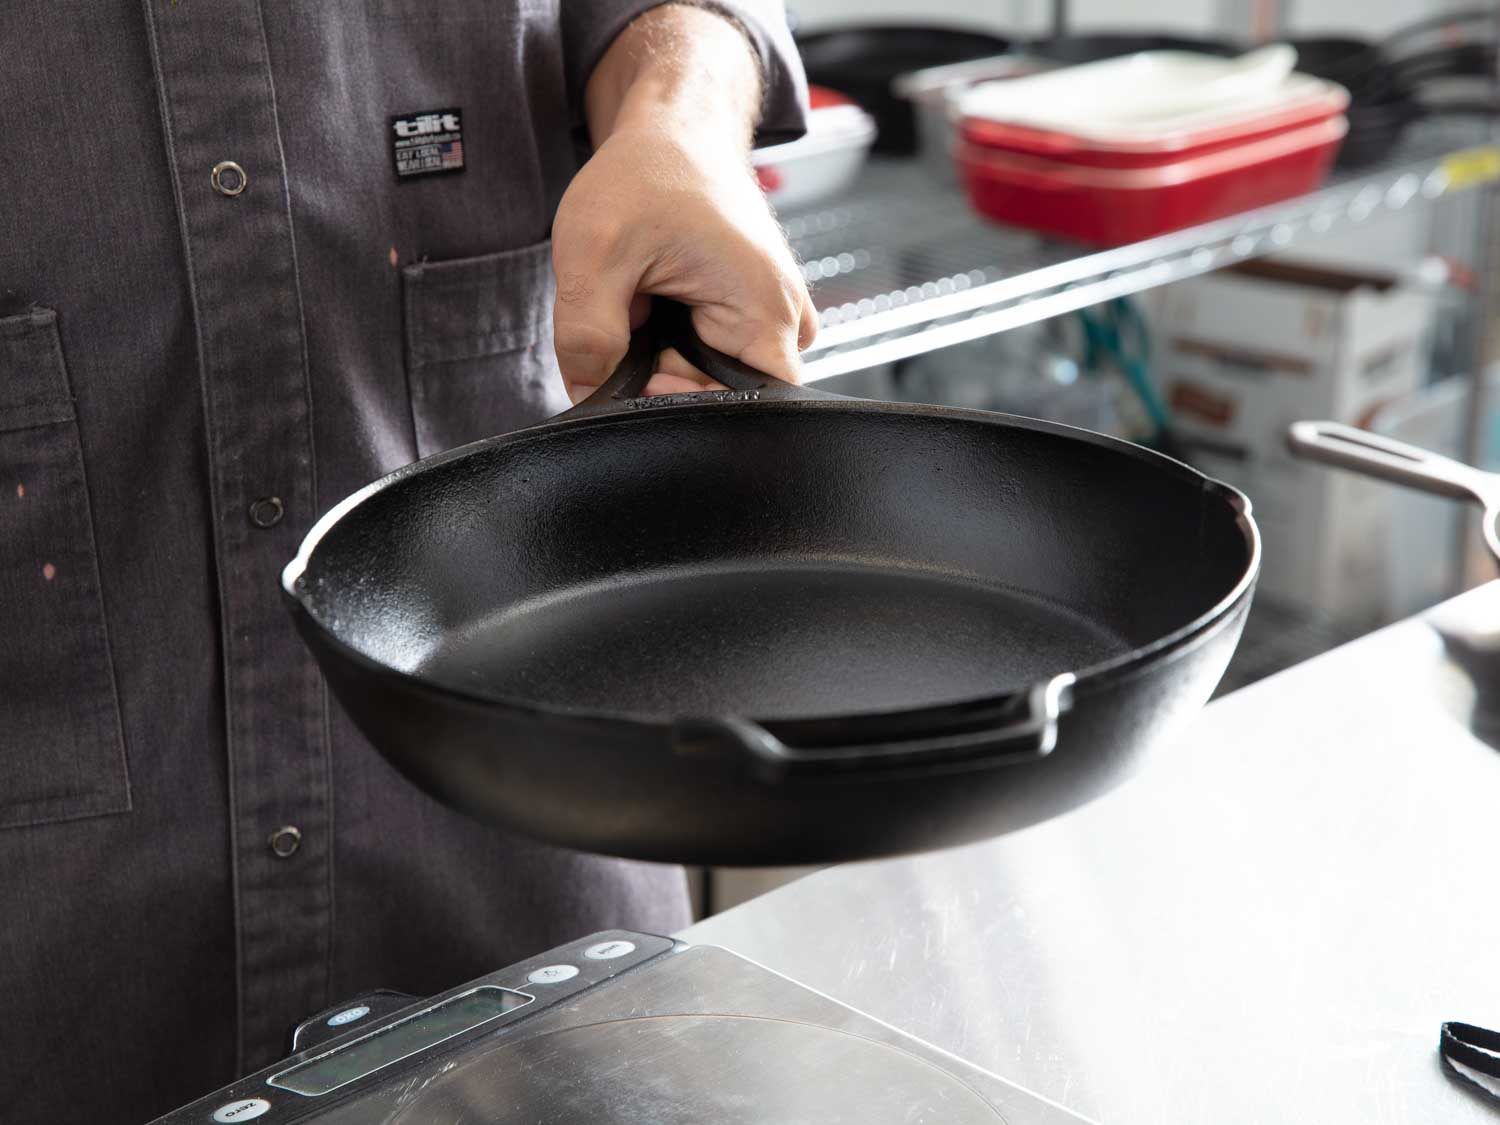 Lodge's Blacklock skillet is lightweight and comfortable to hold, as shown in the hand of the review here.